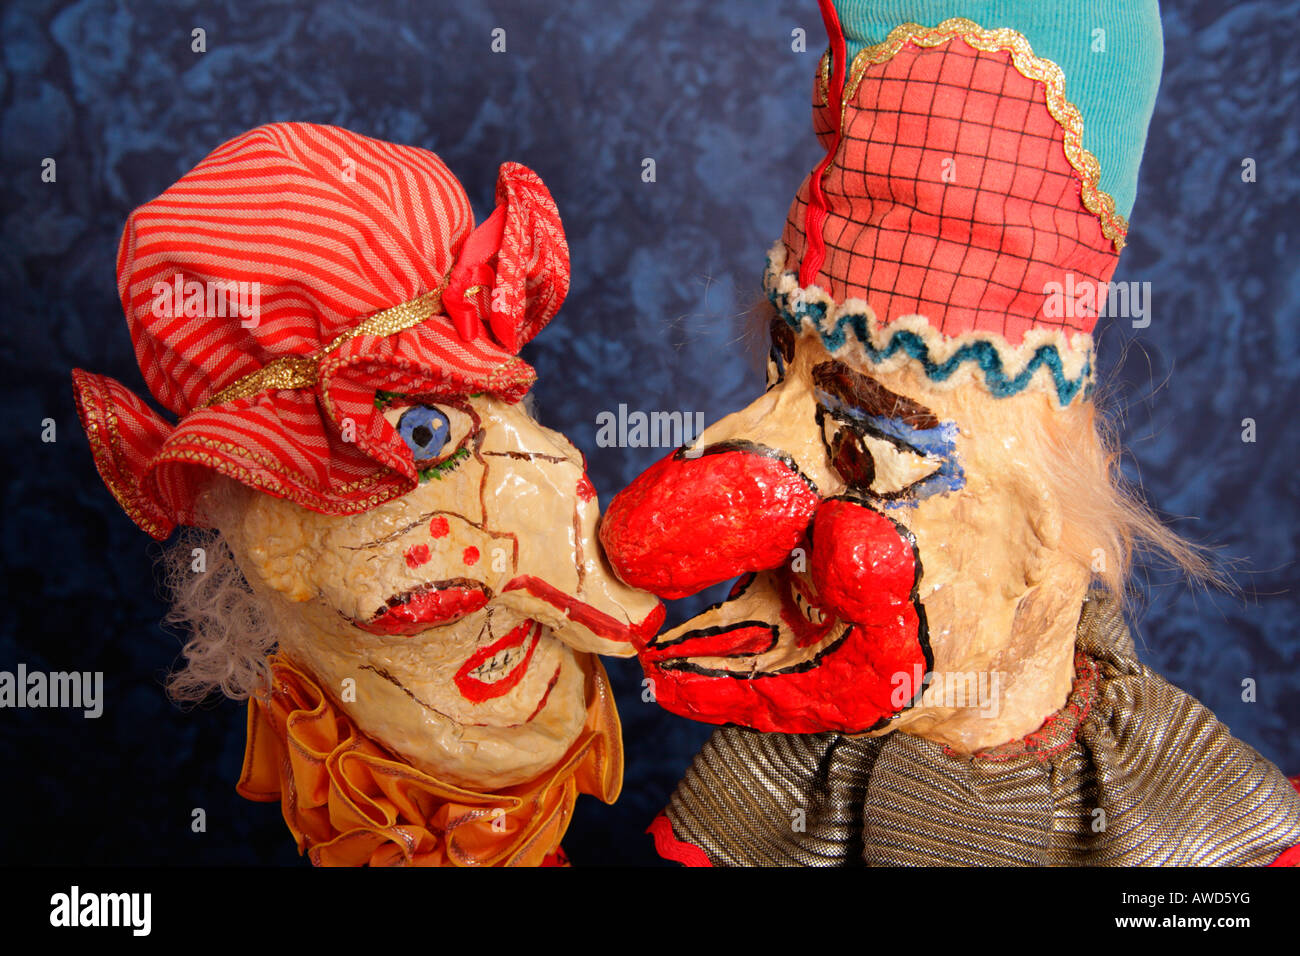 Close up of traditional Punch and Judy hand puppets in action in Punch and Judy puppet show. Stock Photo